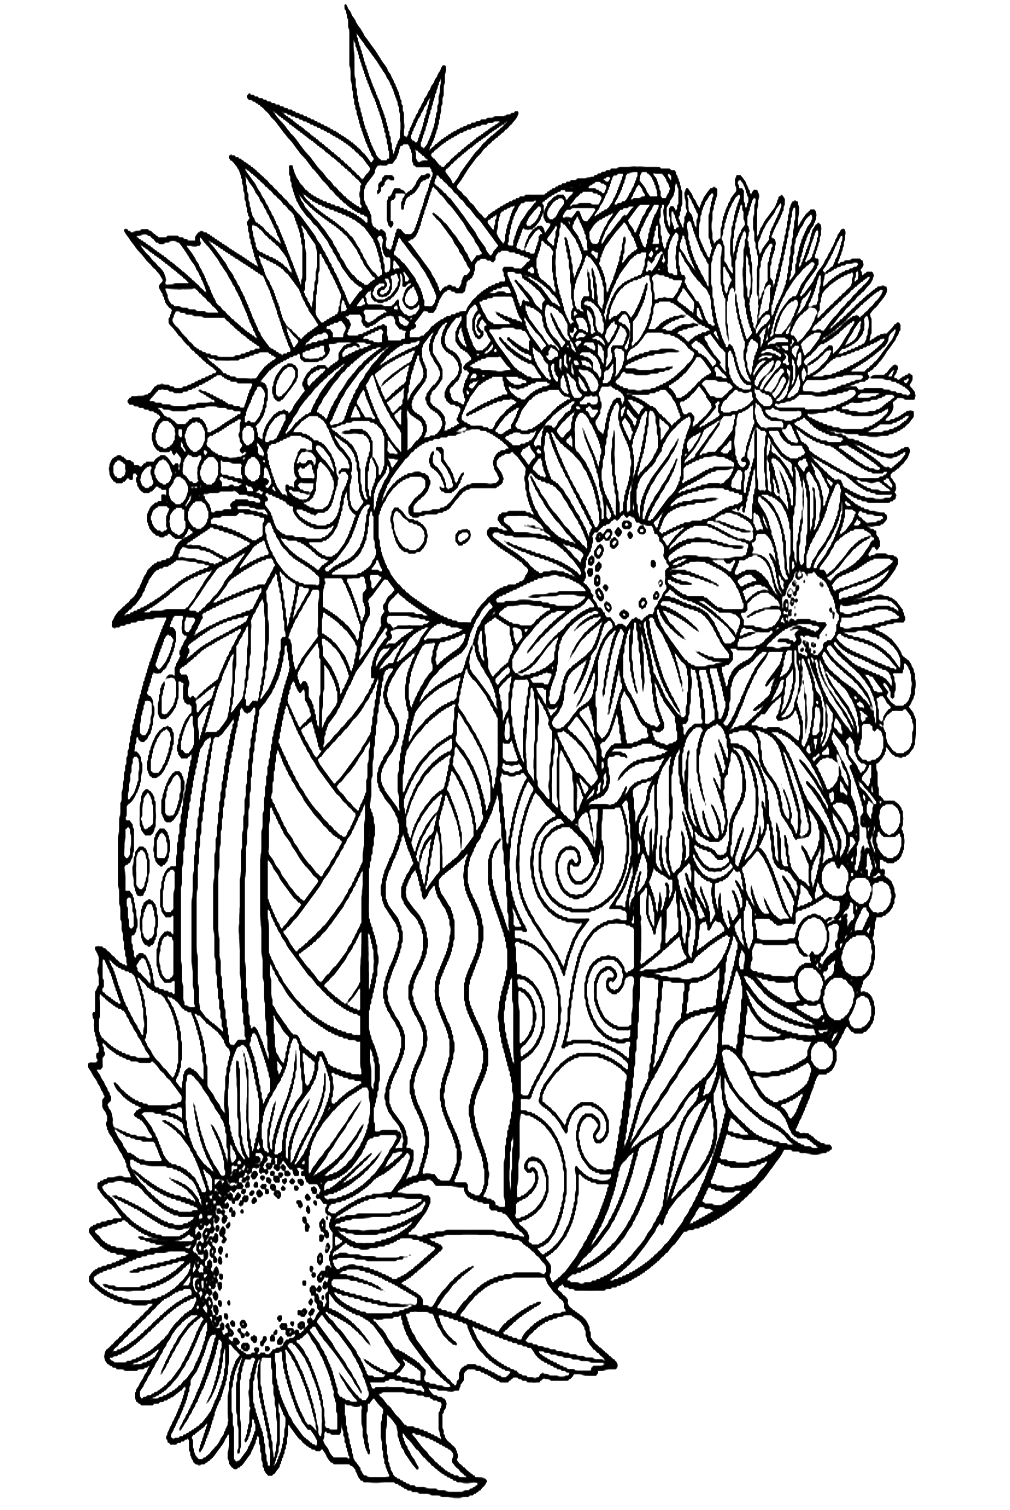 Pretty Halloween Pumpkin And Sunflowers Coloring Page